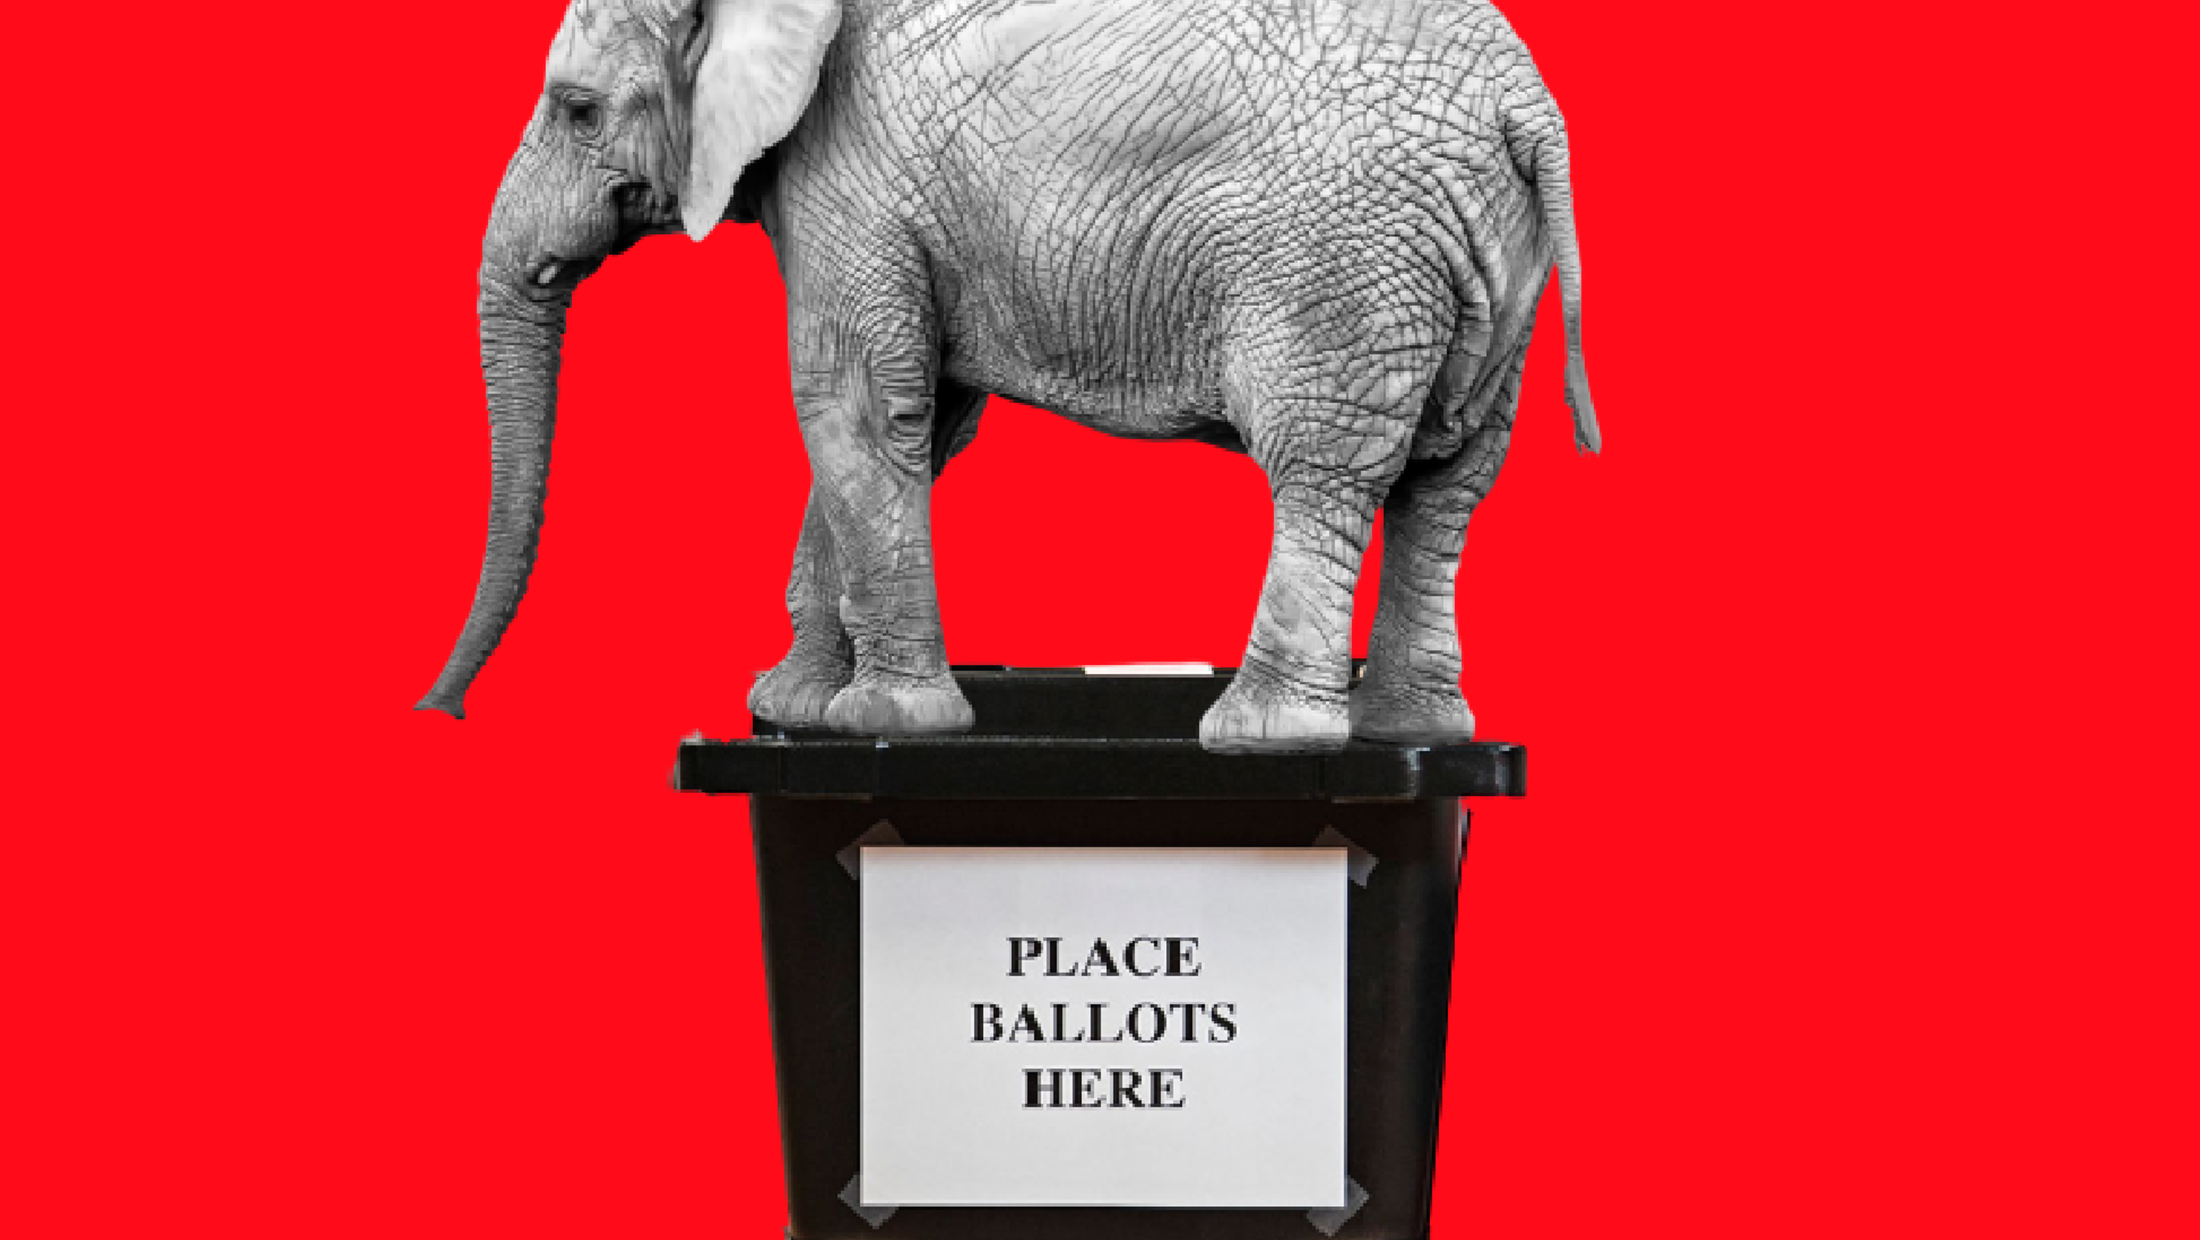 An elephant standing on top of a sealed box that says "Place Ballots Here"